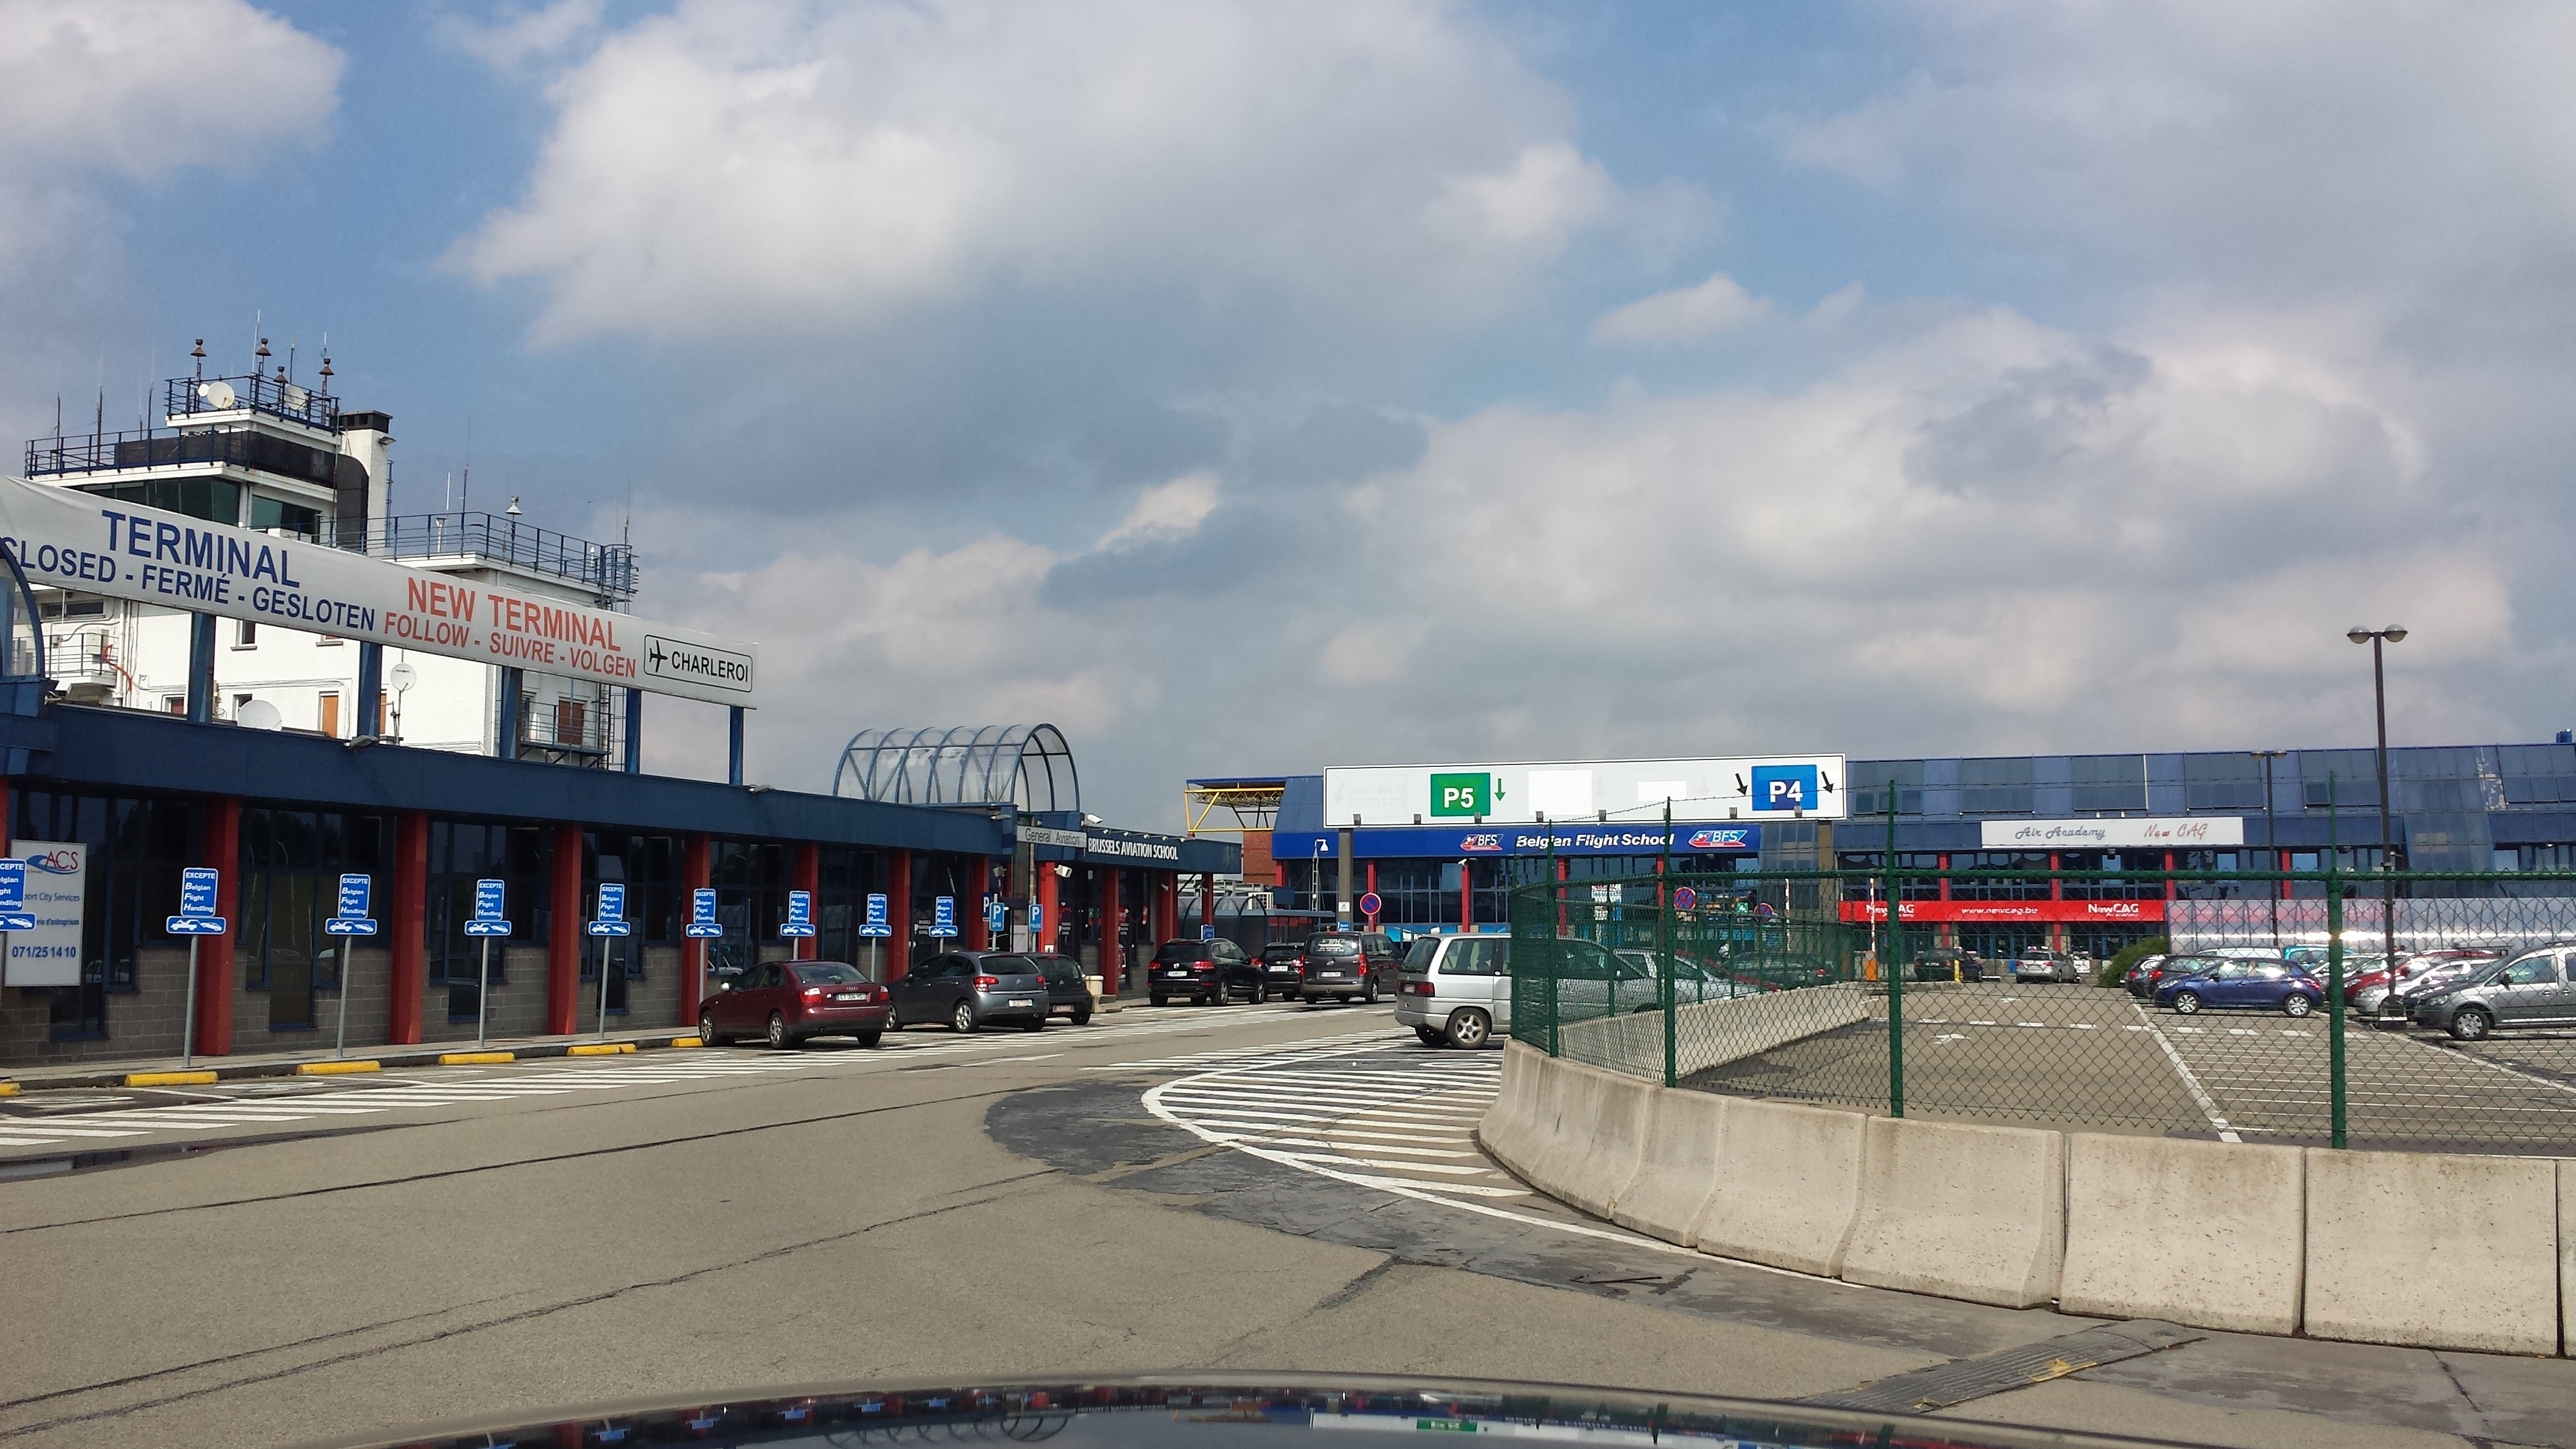 New low cost parking now available at Charleroi Airport